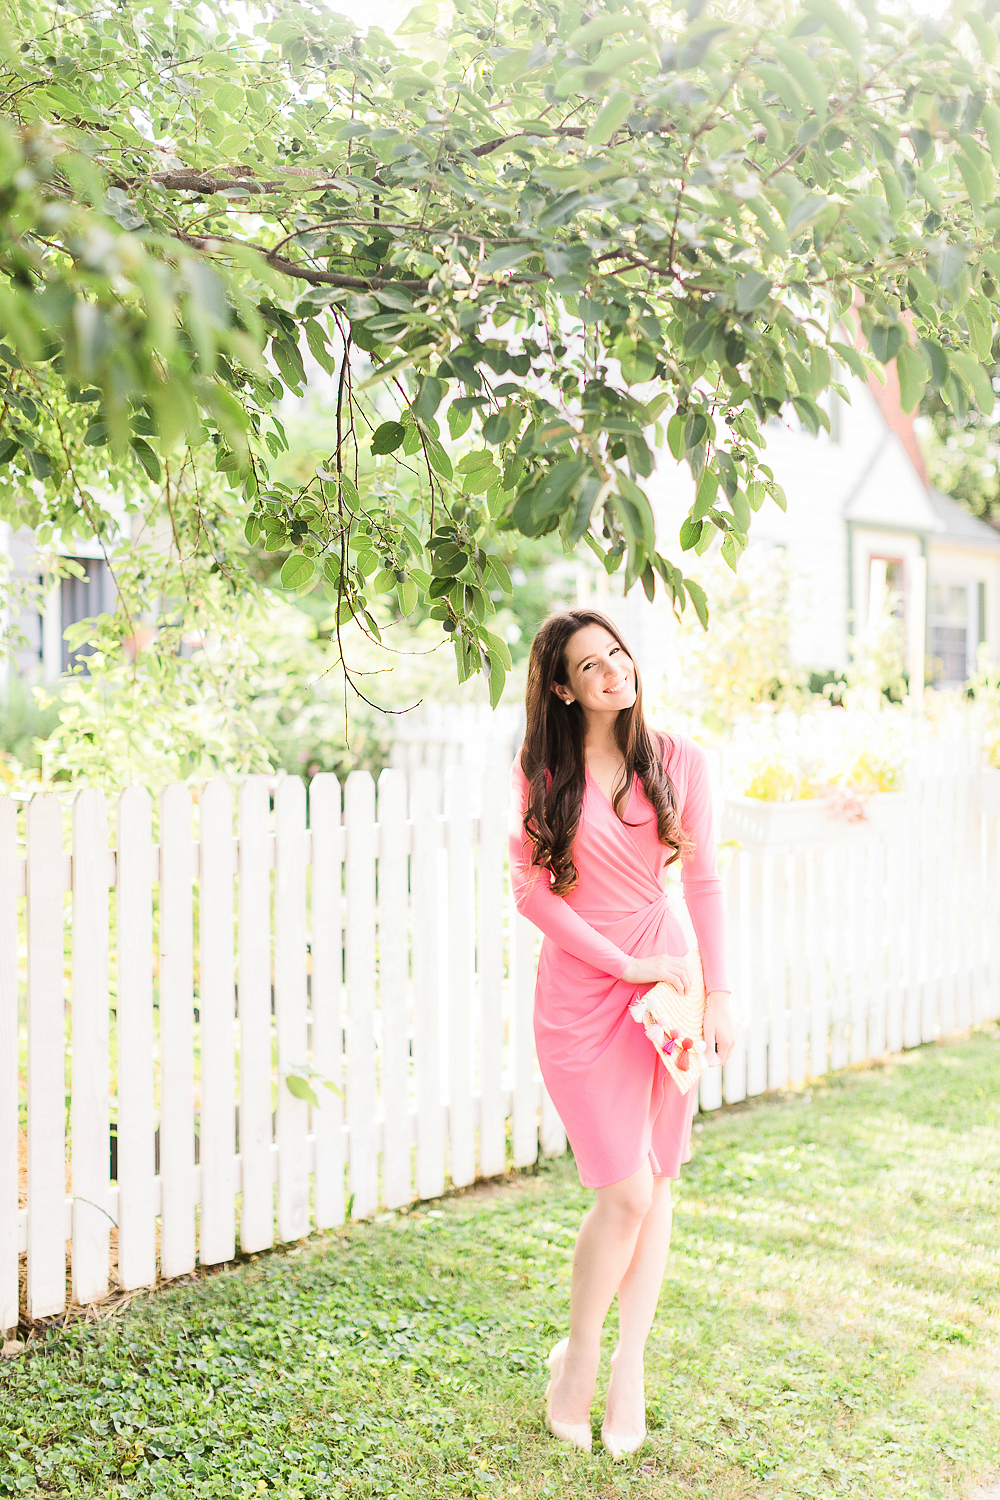 What to wear to a fall baby shower by affordable style blogger Stephanie Ziajka from Diary of a Debutante, what to wear to a baby shower in October, what to wear for gender reveal, how to dress for breast cancer awareness, pink Lark & Ro wrap dress with pink straw tassel clutch and M. Gemi The Cammeo pumps